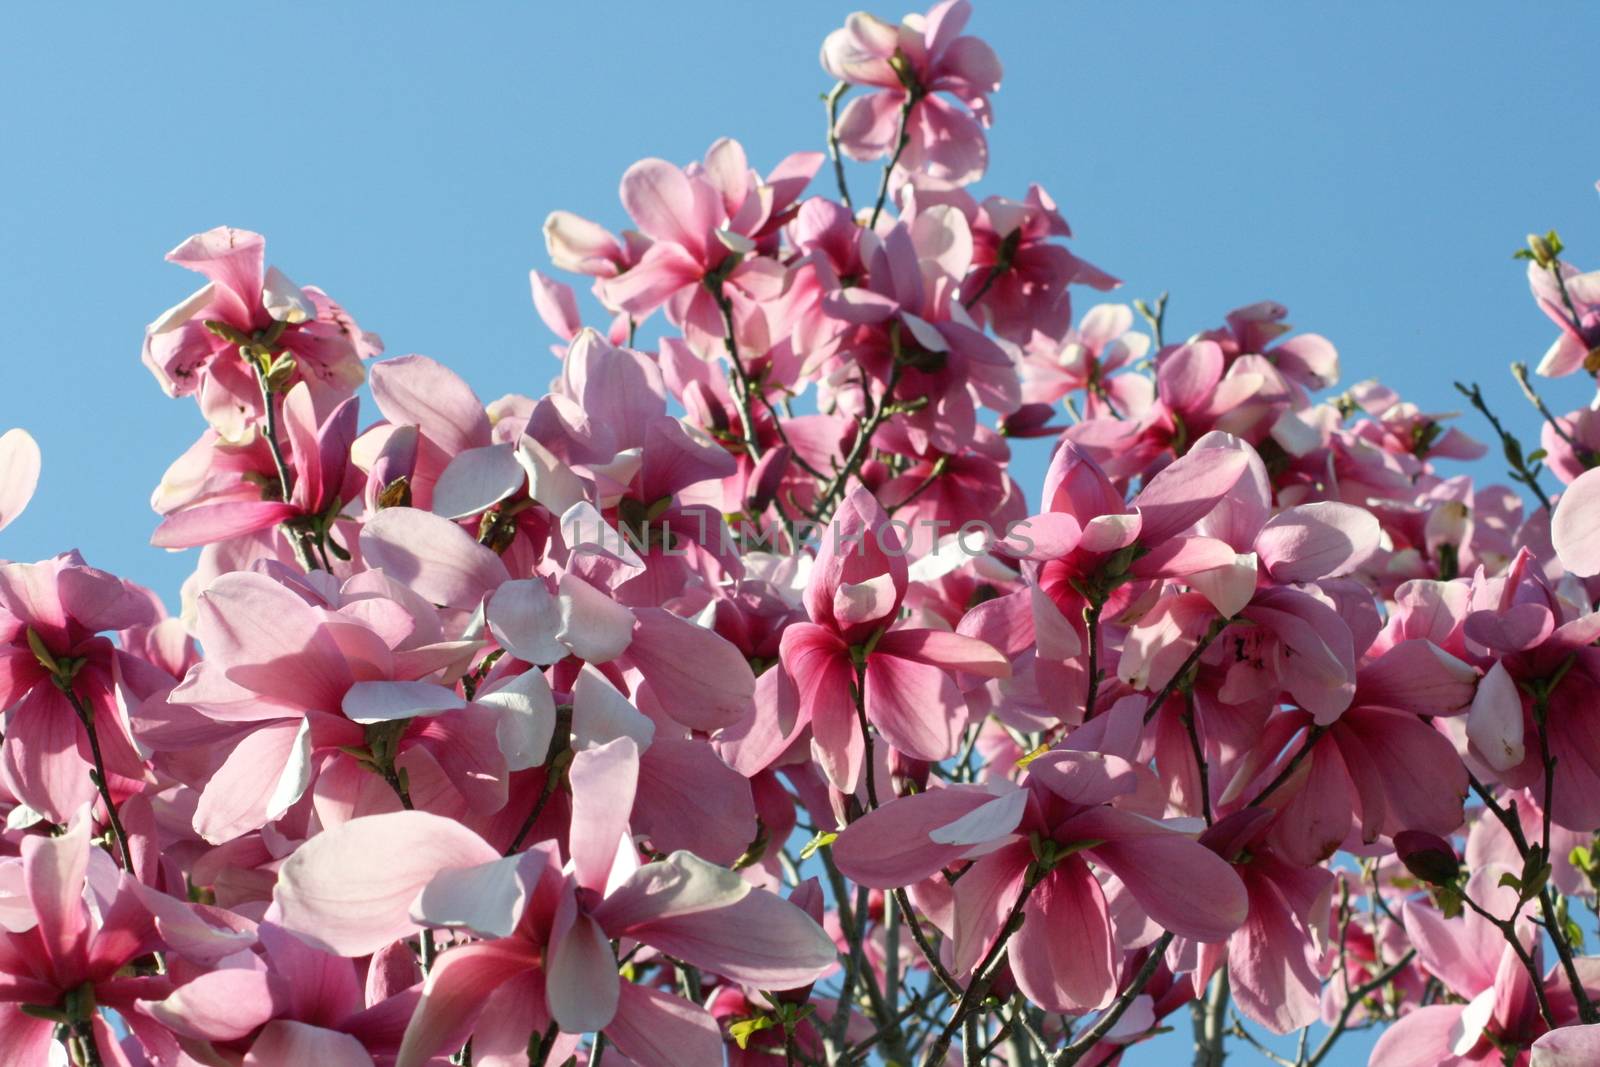 Bright red magnolia tree in full bloom    Hellroter Magnolienbaum in voller bl�te by hadot